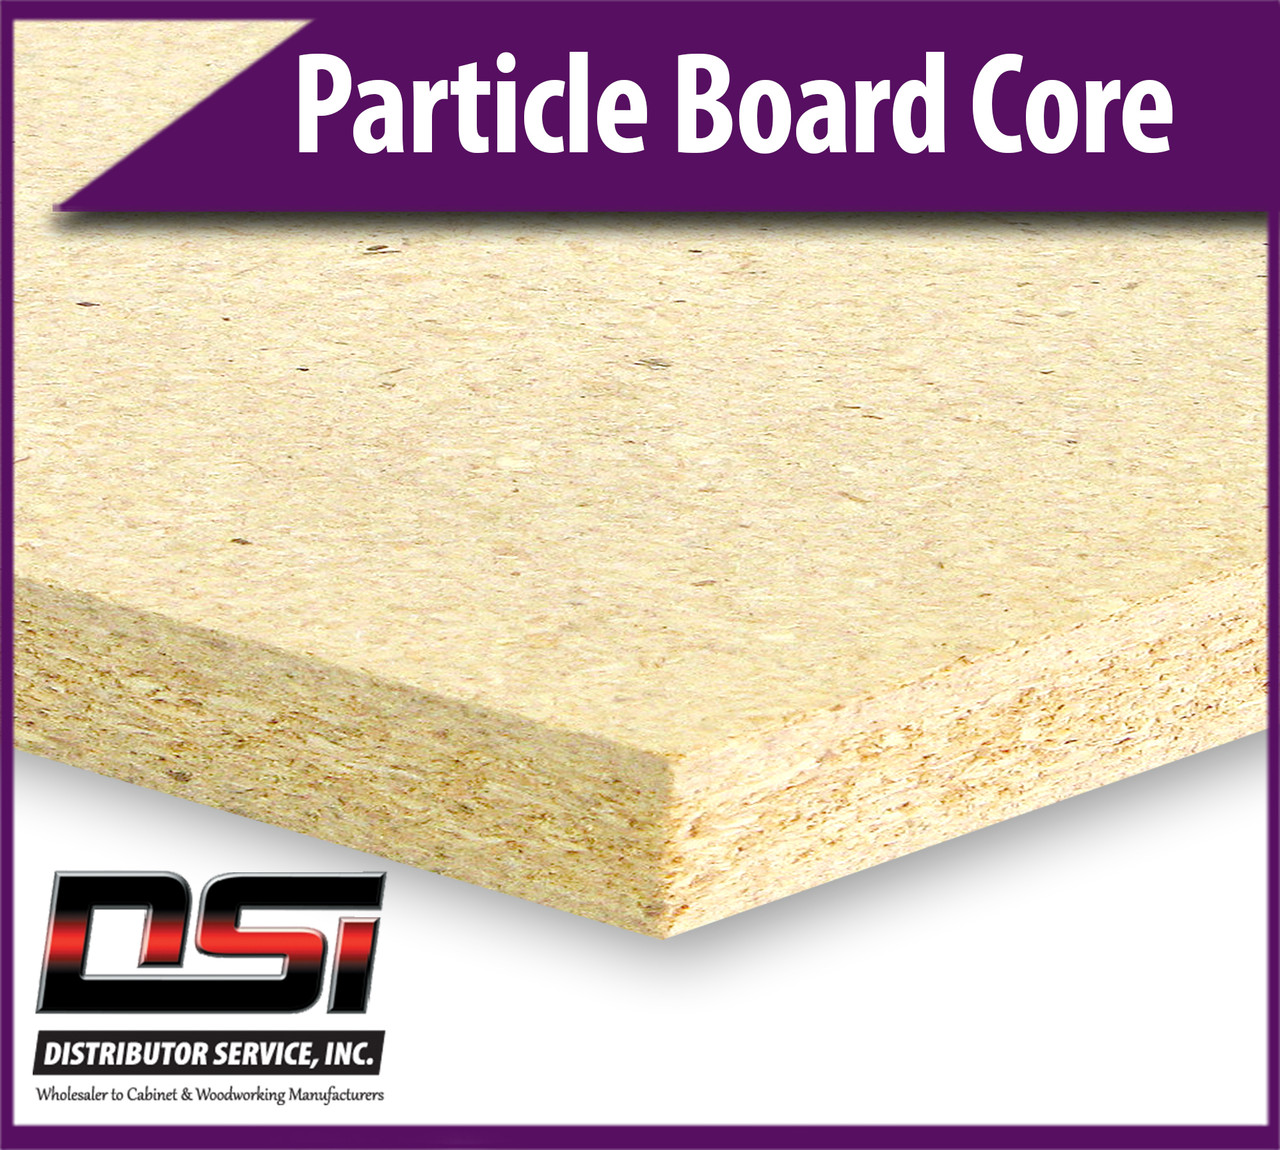 Particle Board Core 3/4" x 61" x 109" Industrial Particleboard Panels